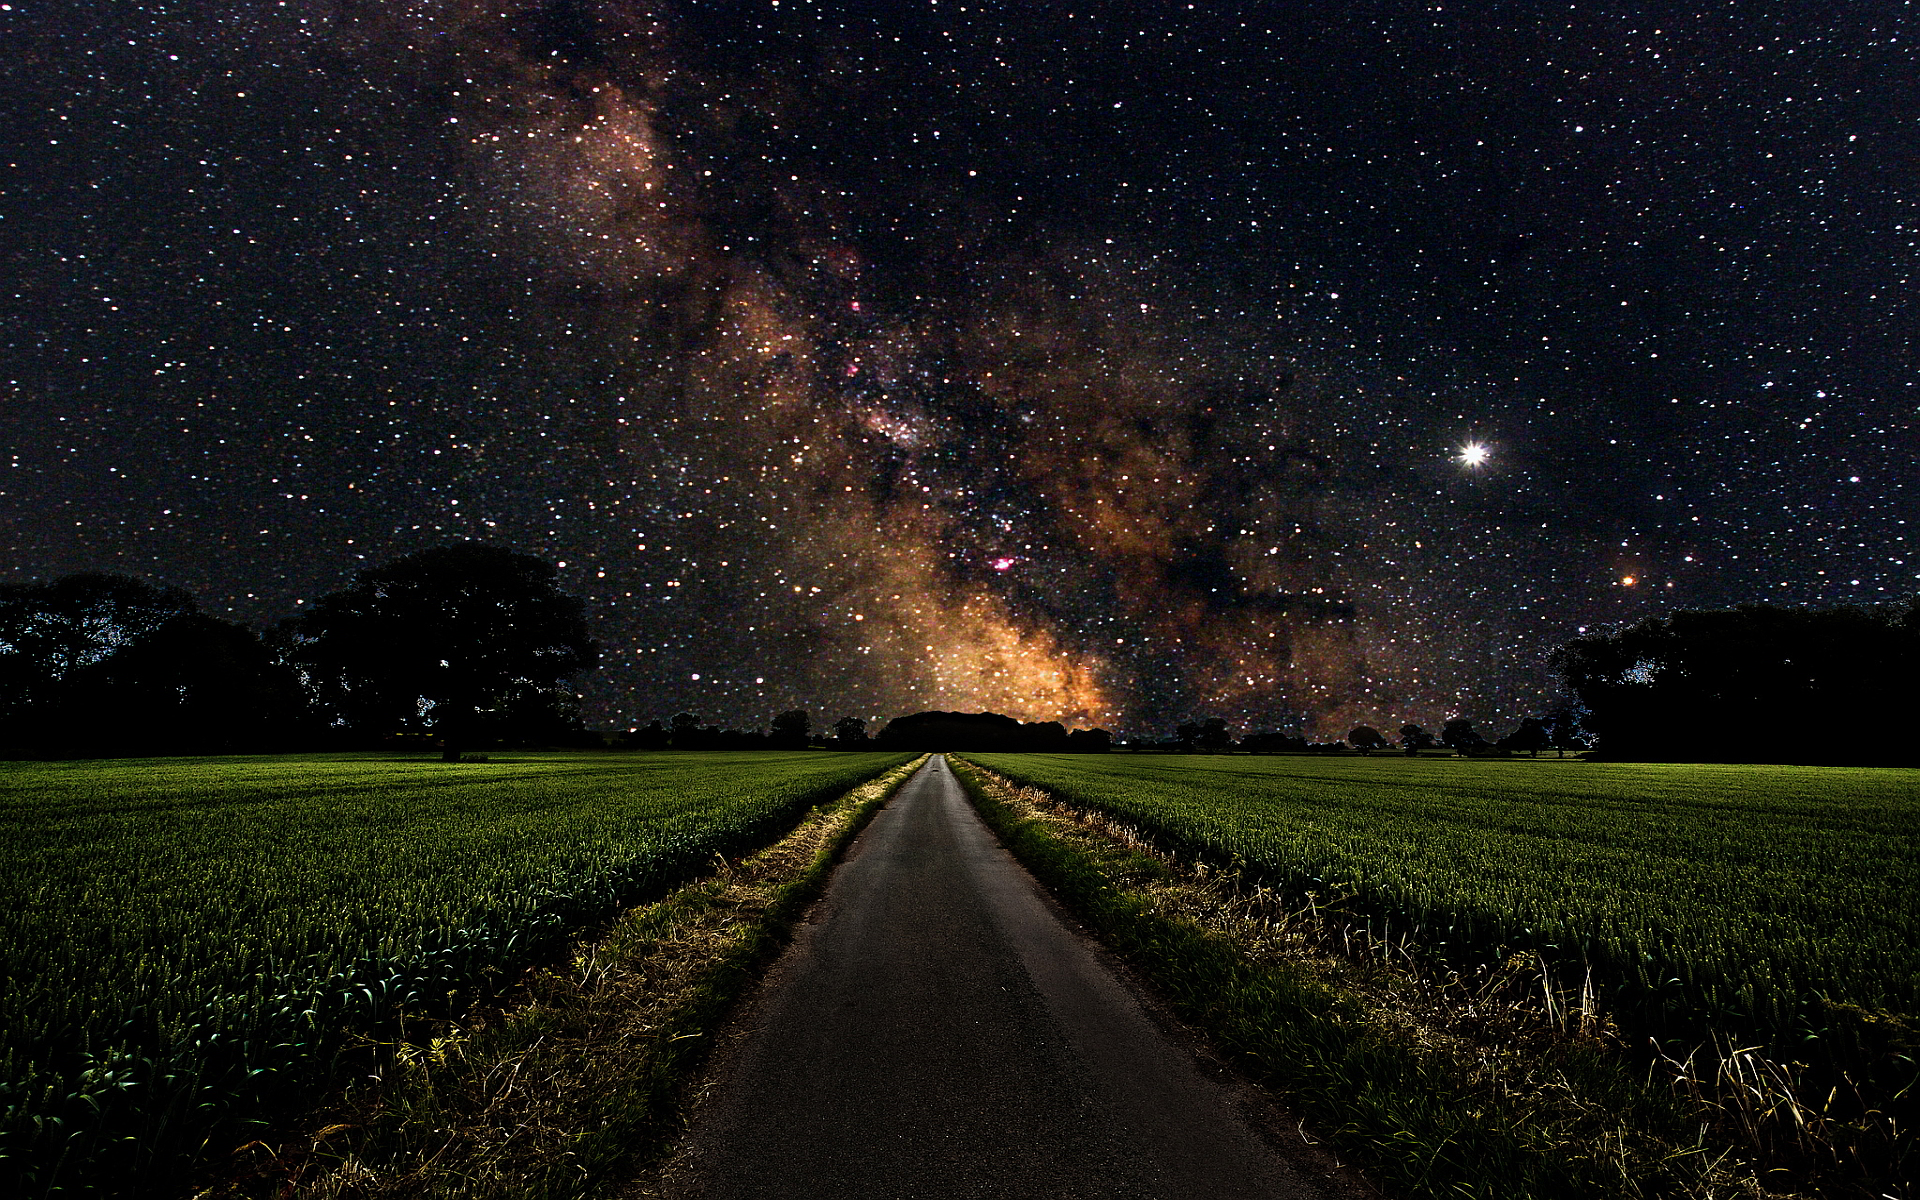 Road On A Starry Night